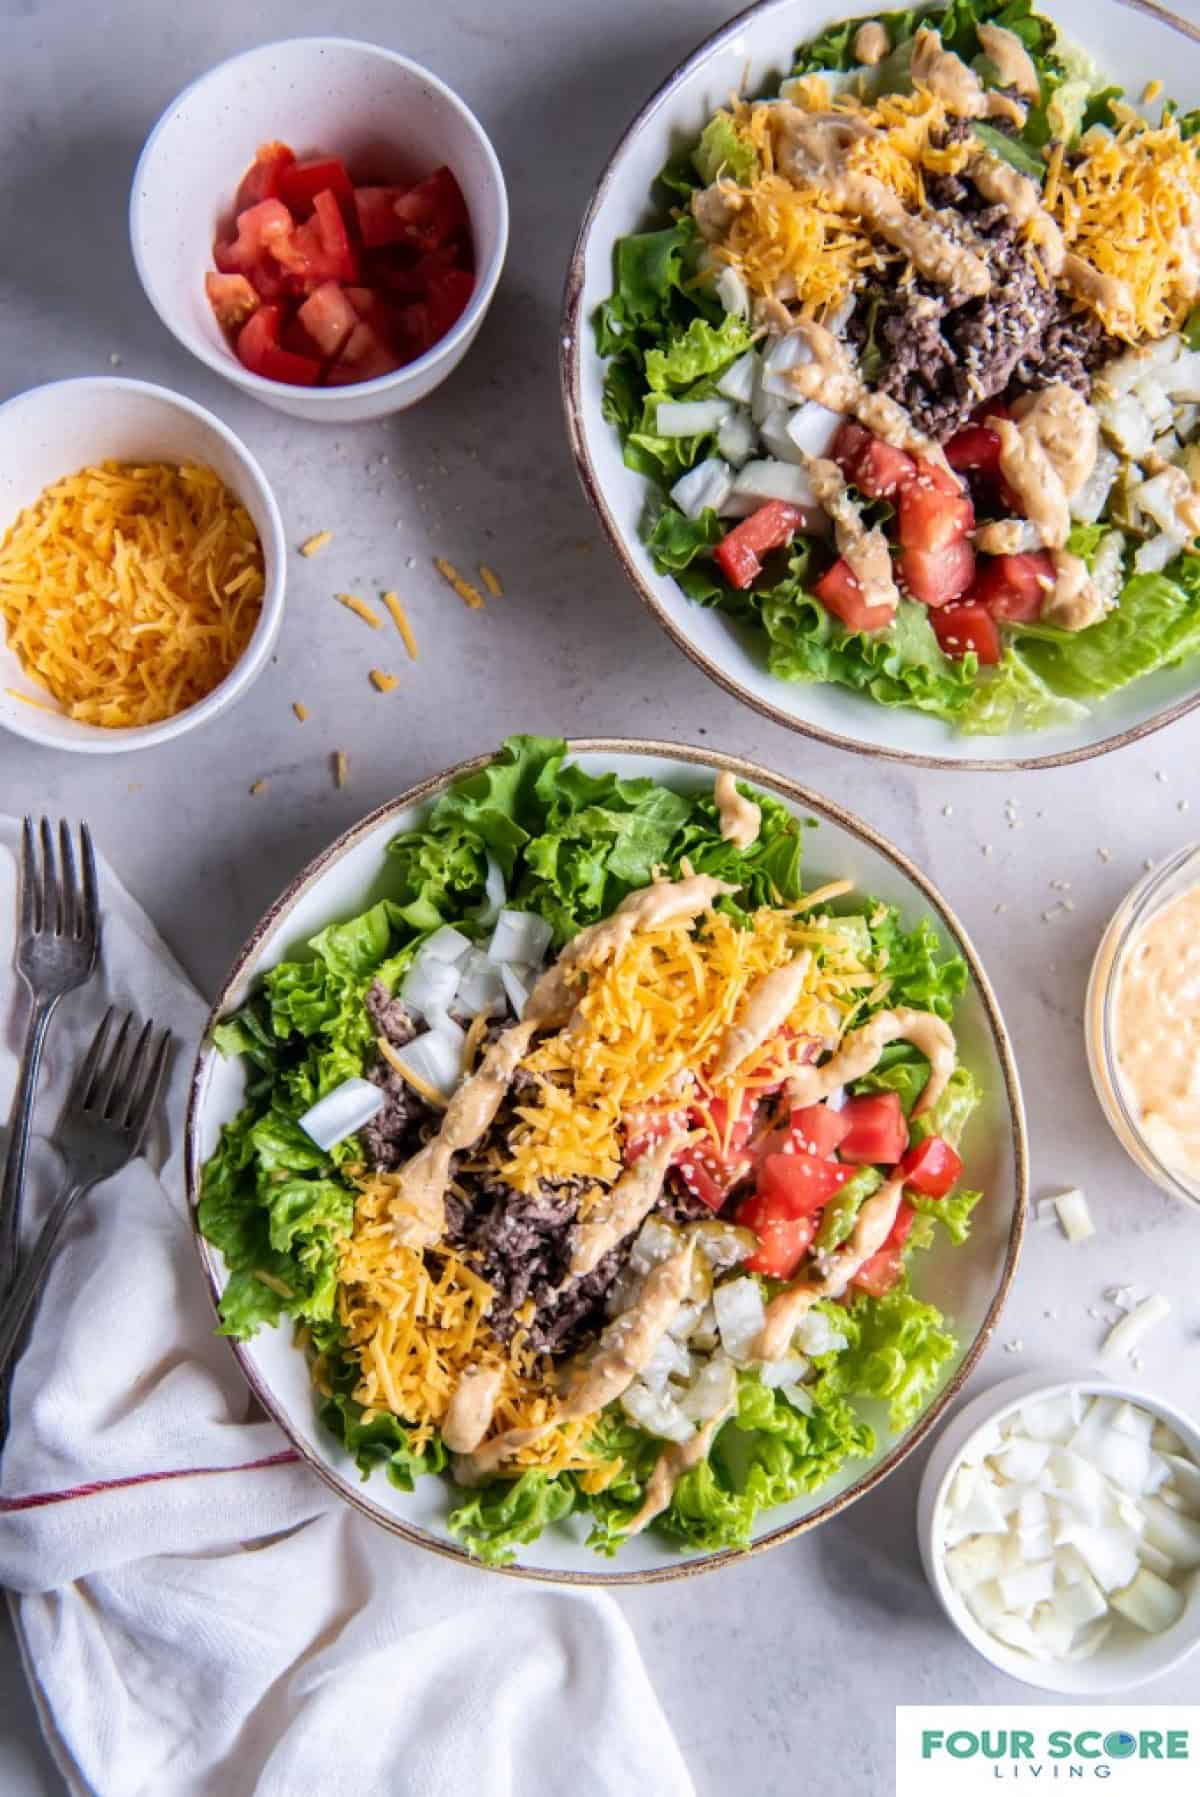 Two plates of salad greens containing cooked ground beef, shredded cheddar cheese, diced red tomatoes, diced white onions, drizzled big mac sauce and a sprinkle of sesame seeds.